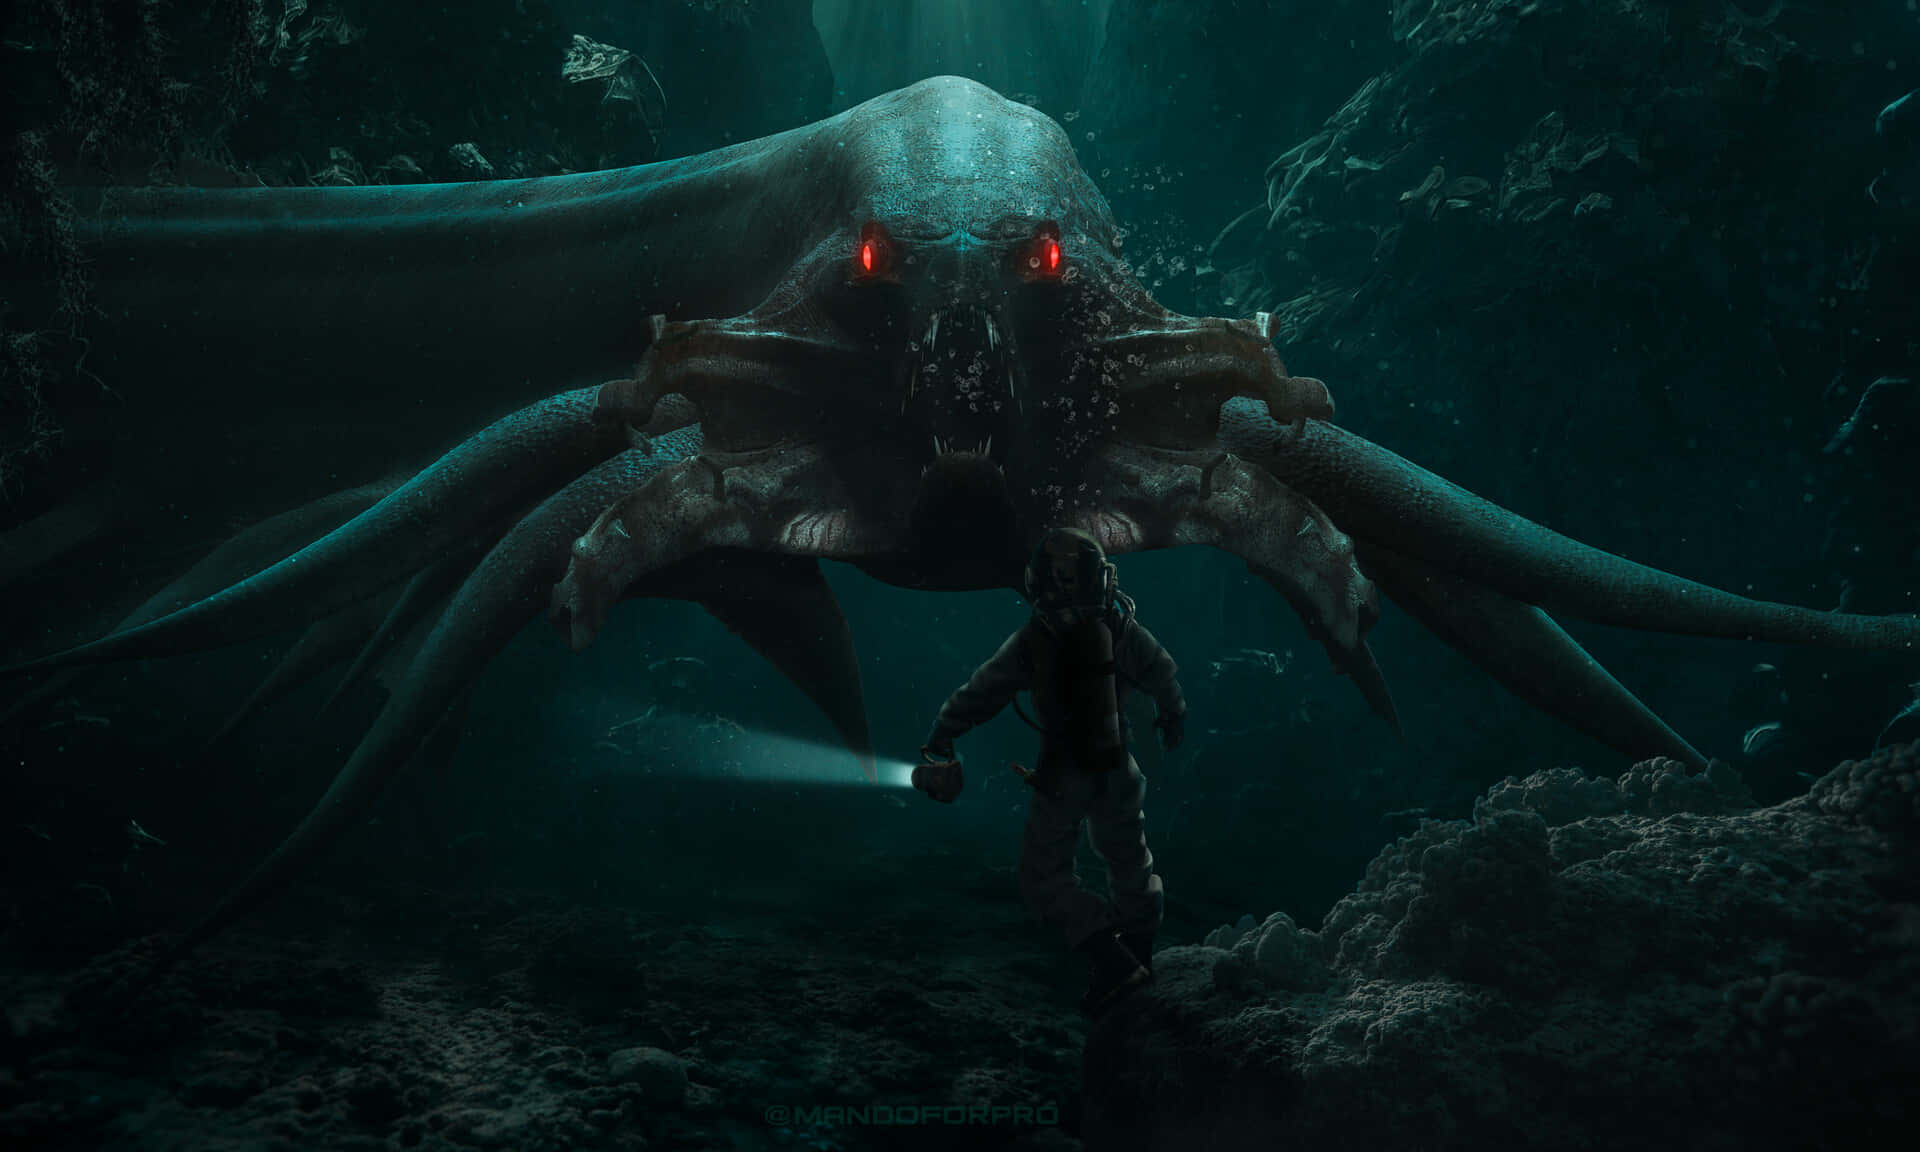 Discover the beautiful yet eerie depths of the ocean.